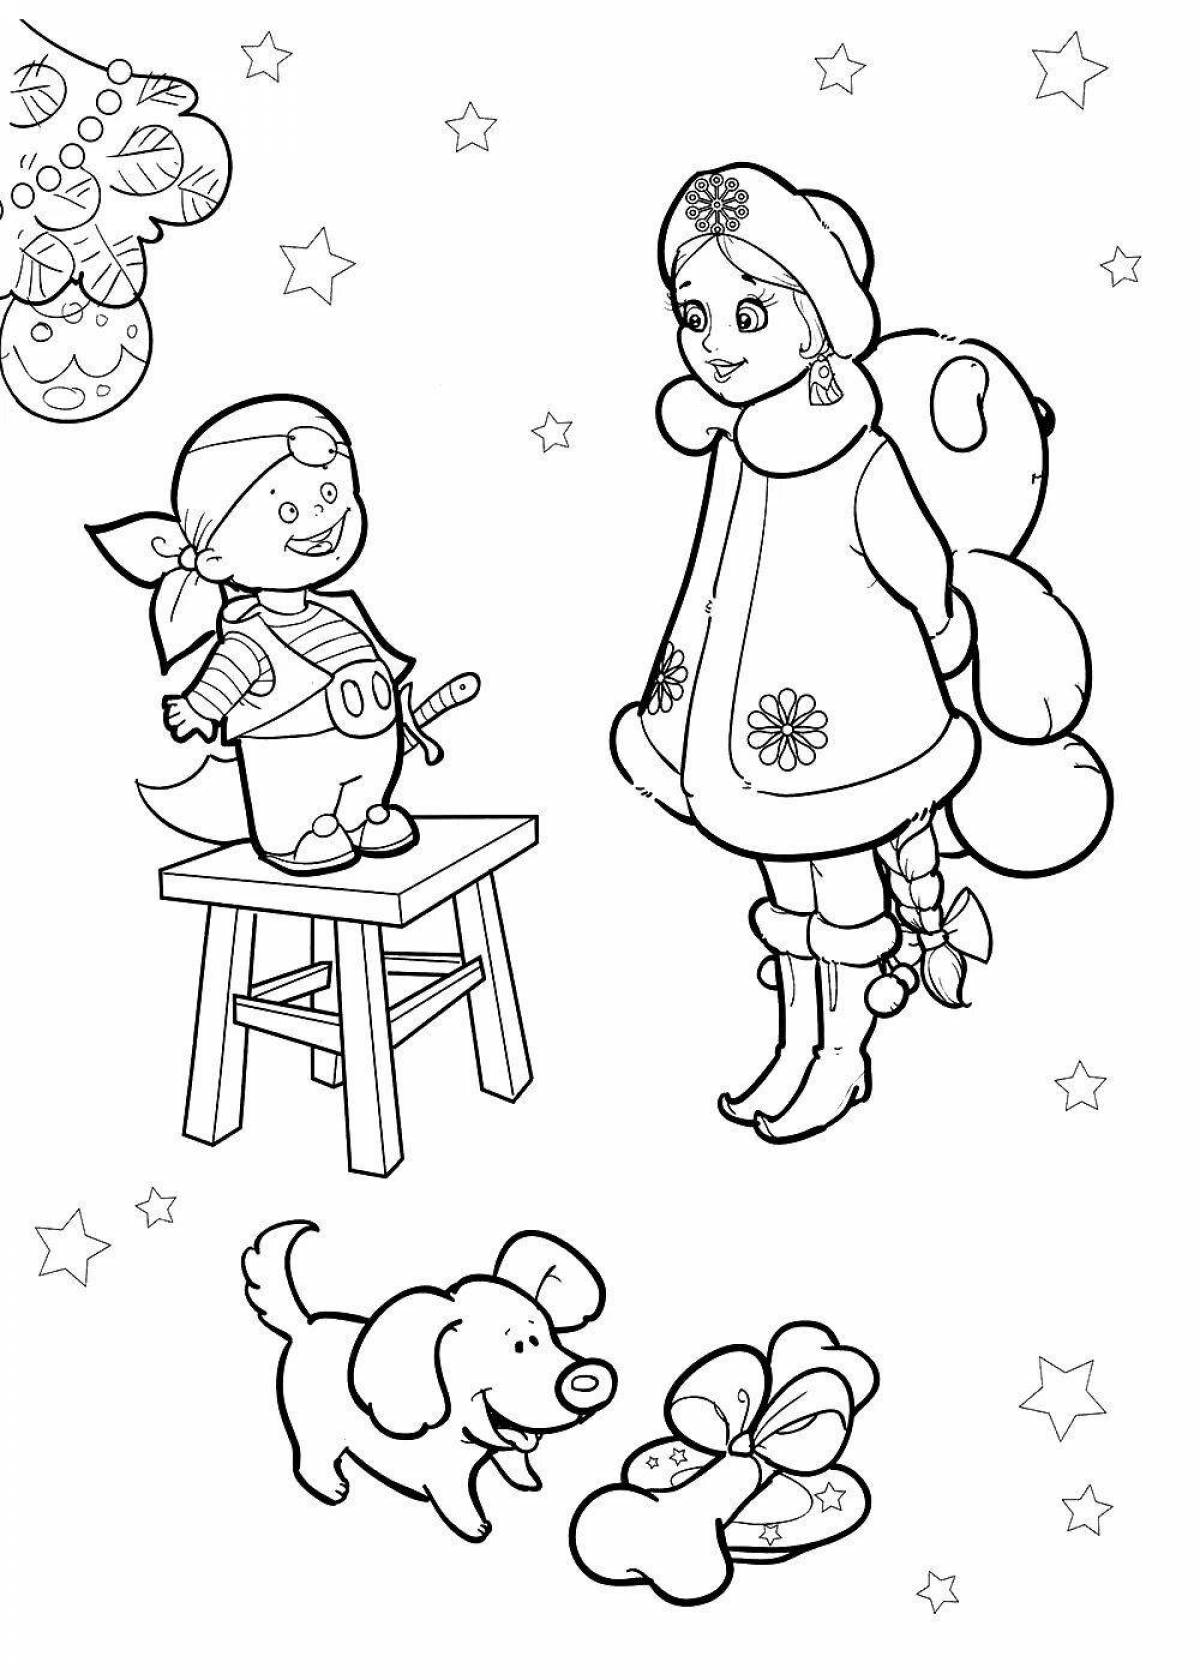 Snow Maiden fairy tale coloring book